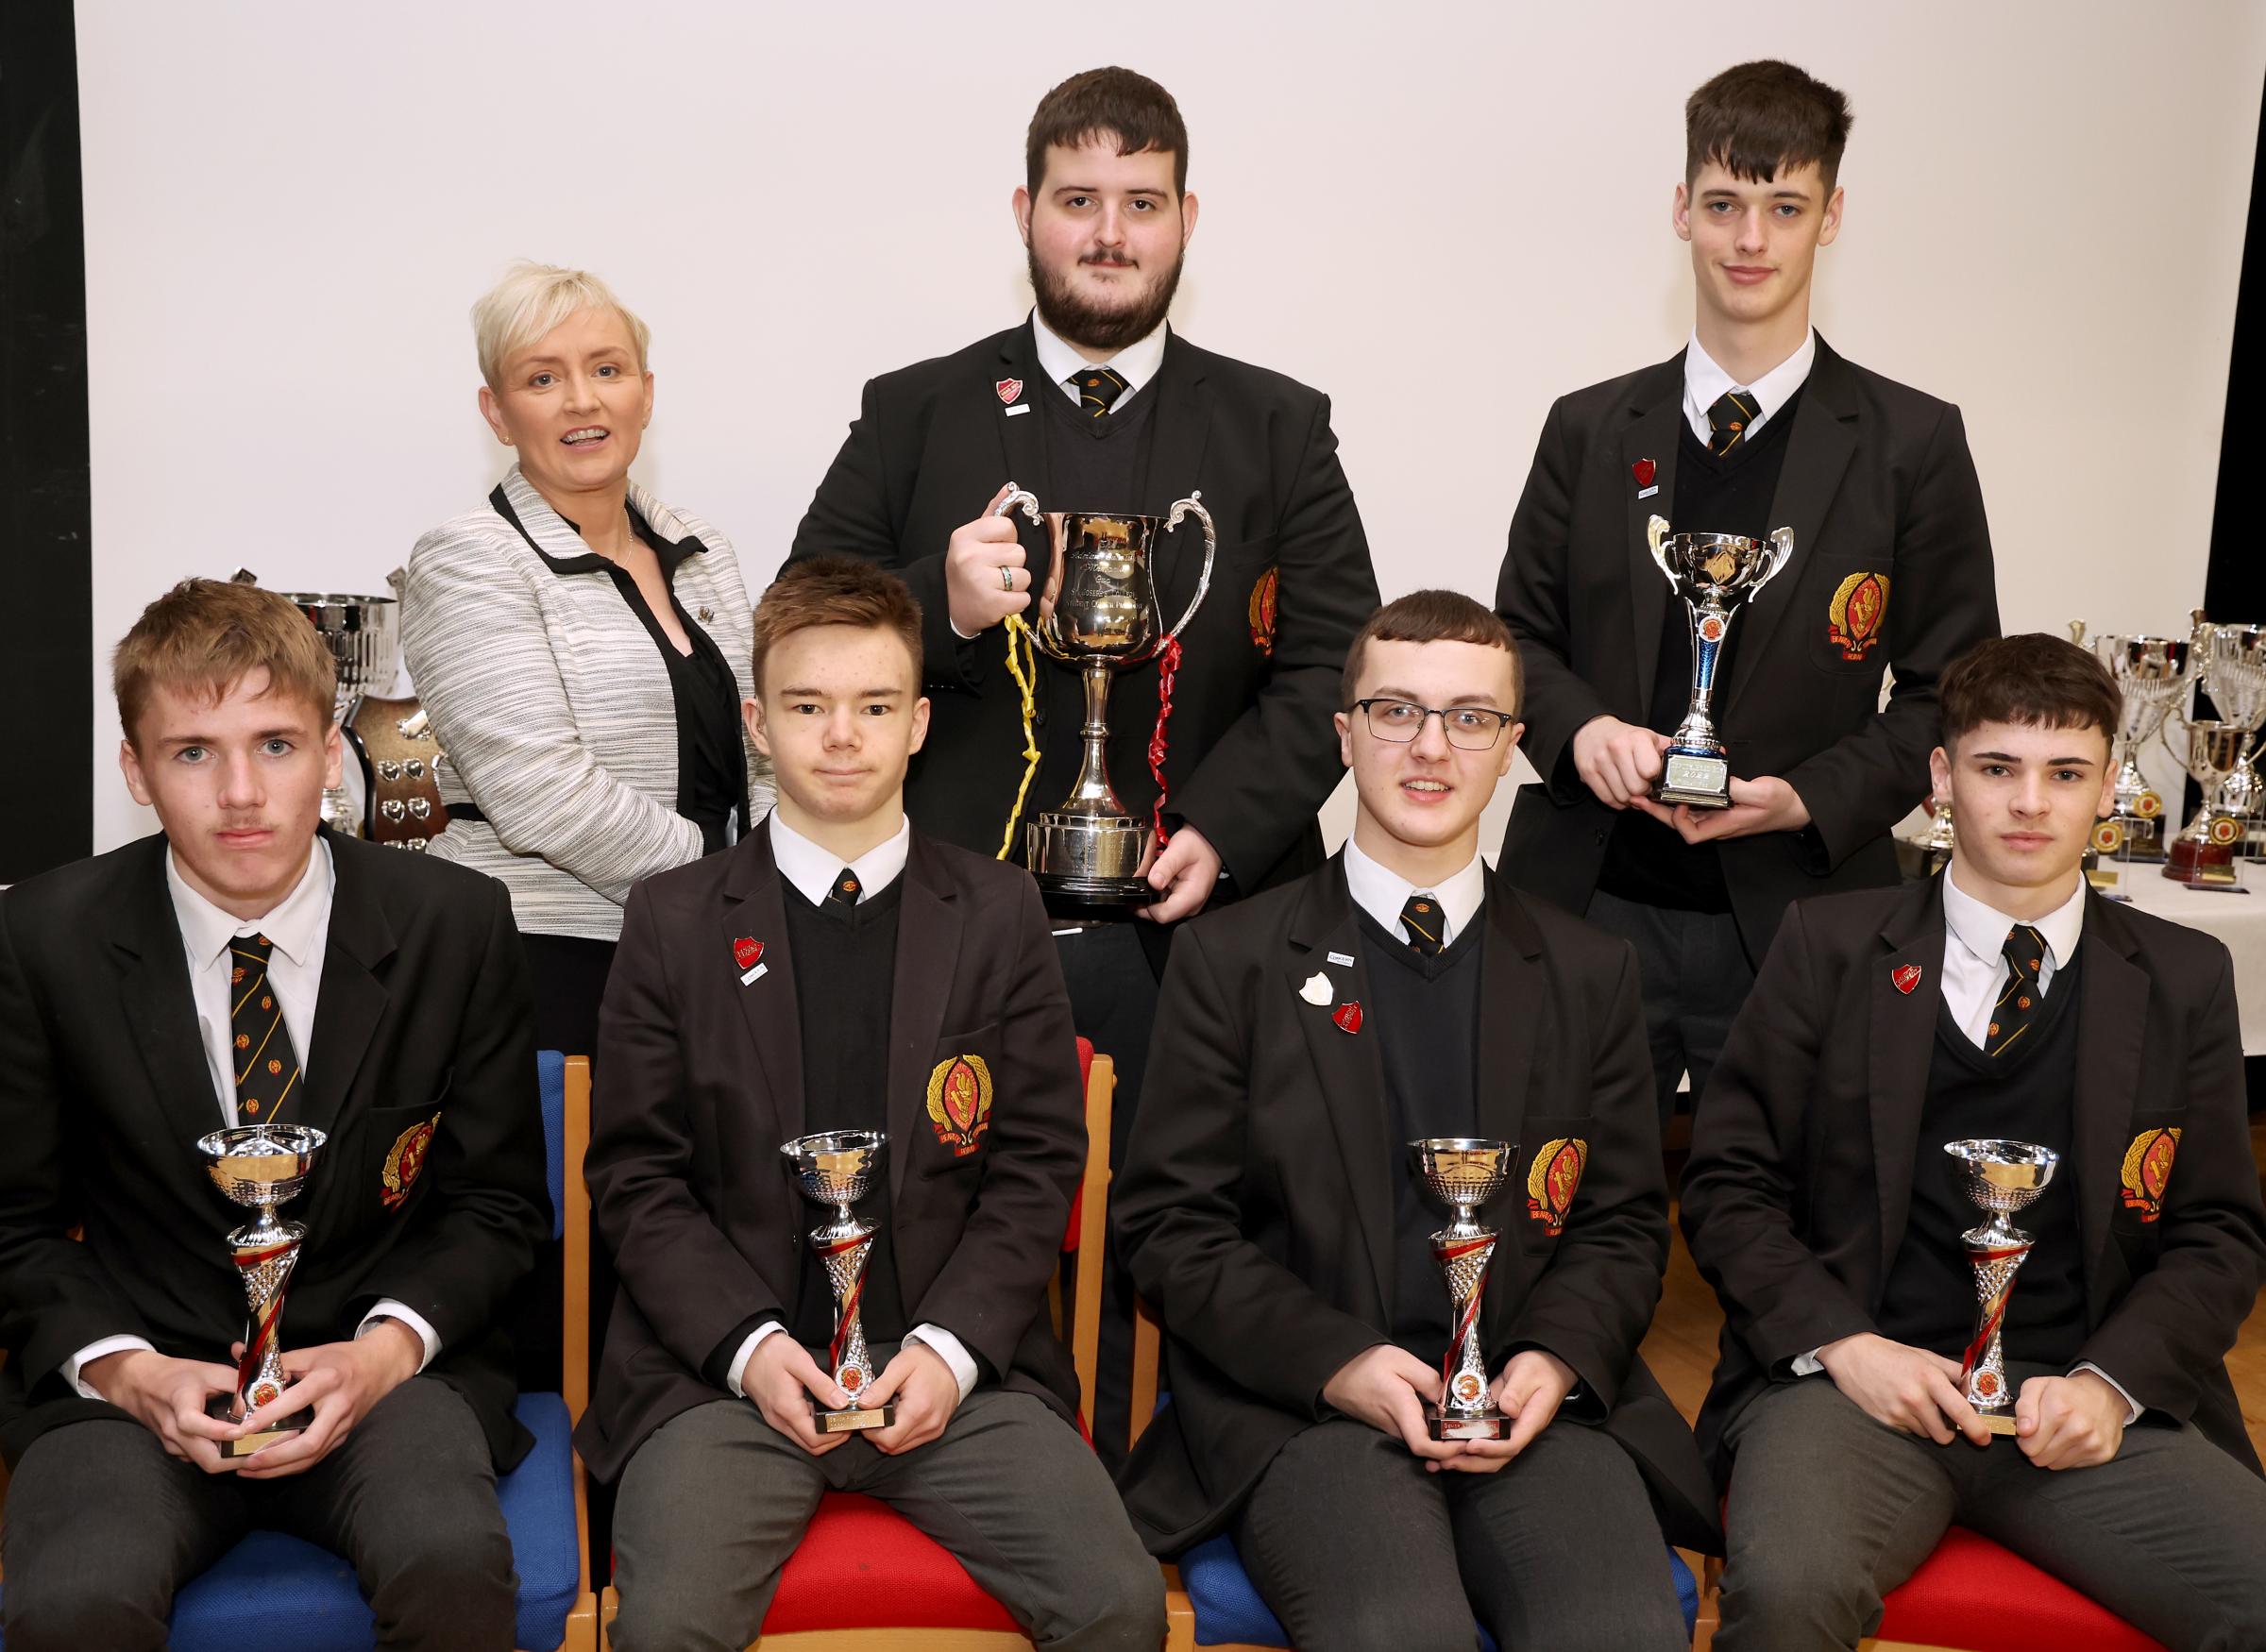 Year 14 Prize Winners are front from left, Joe Doherty, Michael Boyle, Eoin Bullion and Corey Smith. Back from left, Hilina Palmer, Principal, Dennis McGinley, Head Boy and Sean Fee, Deputy Head Boy.